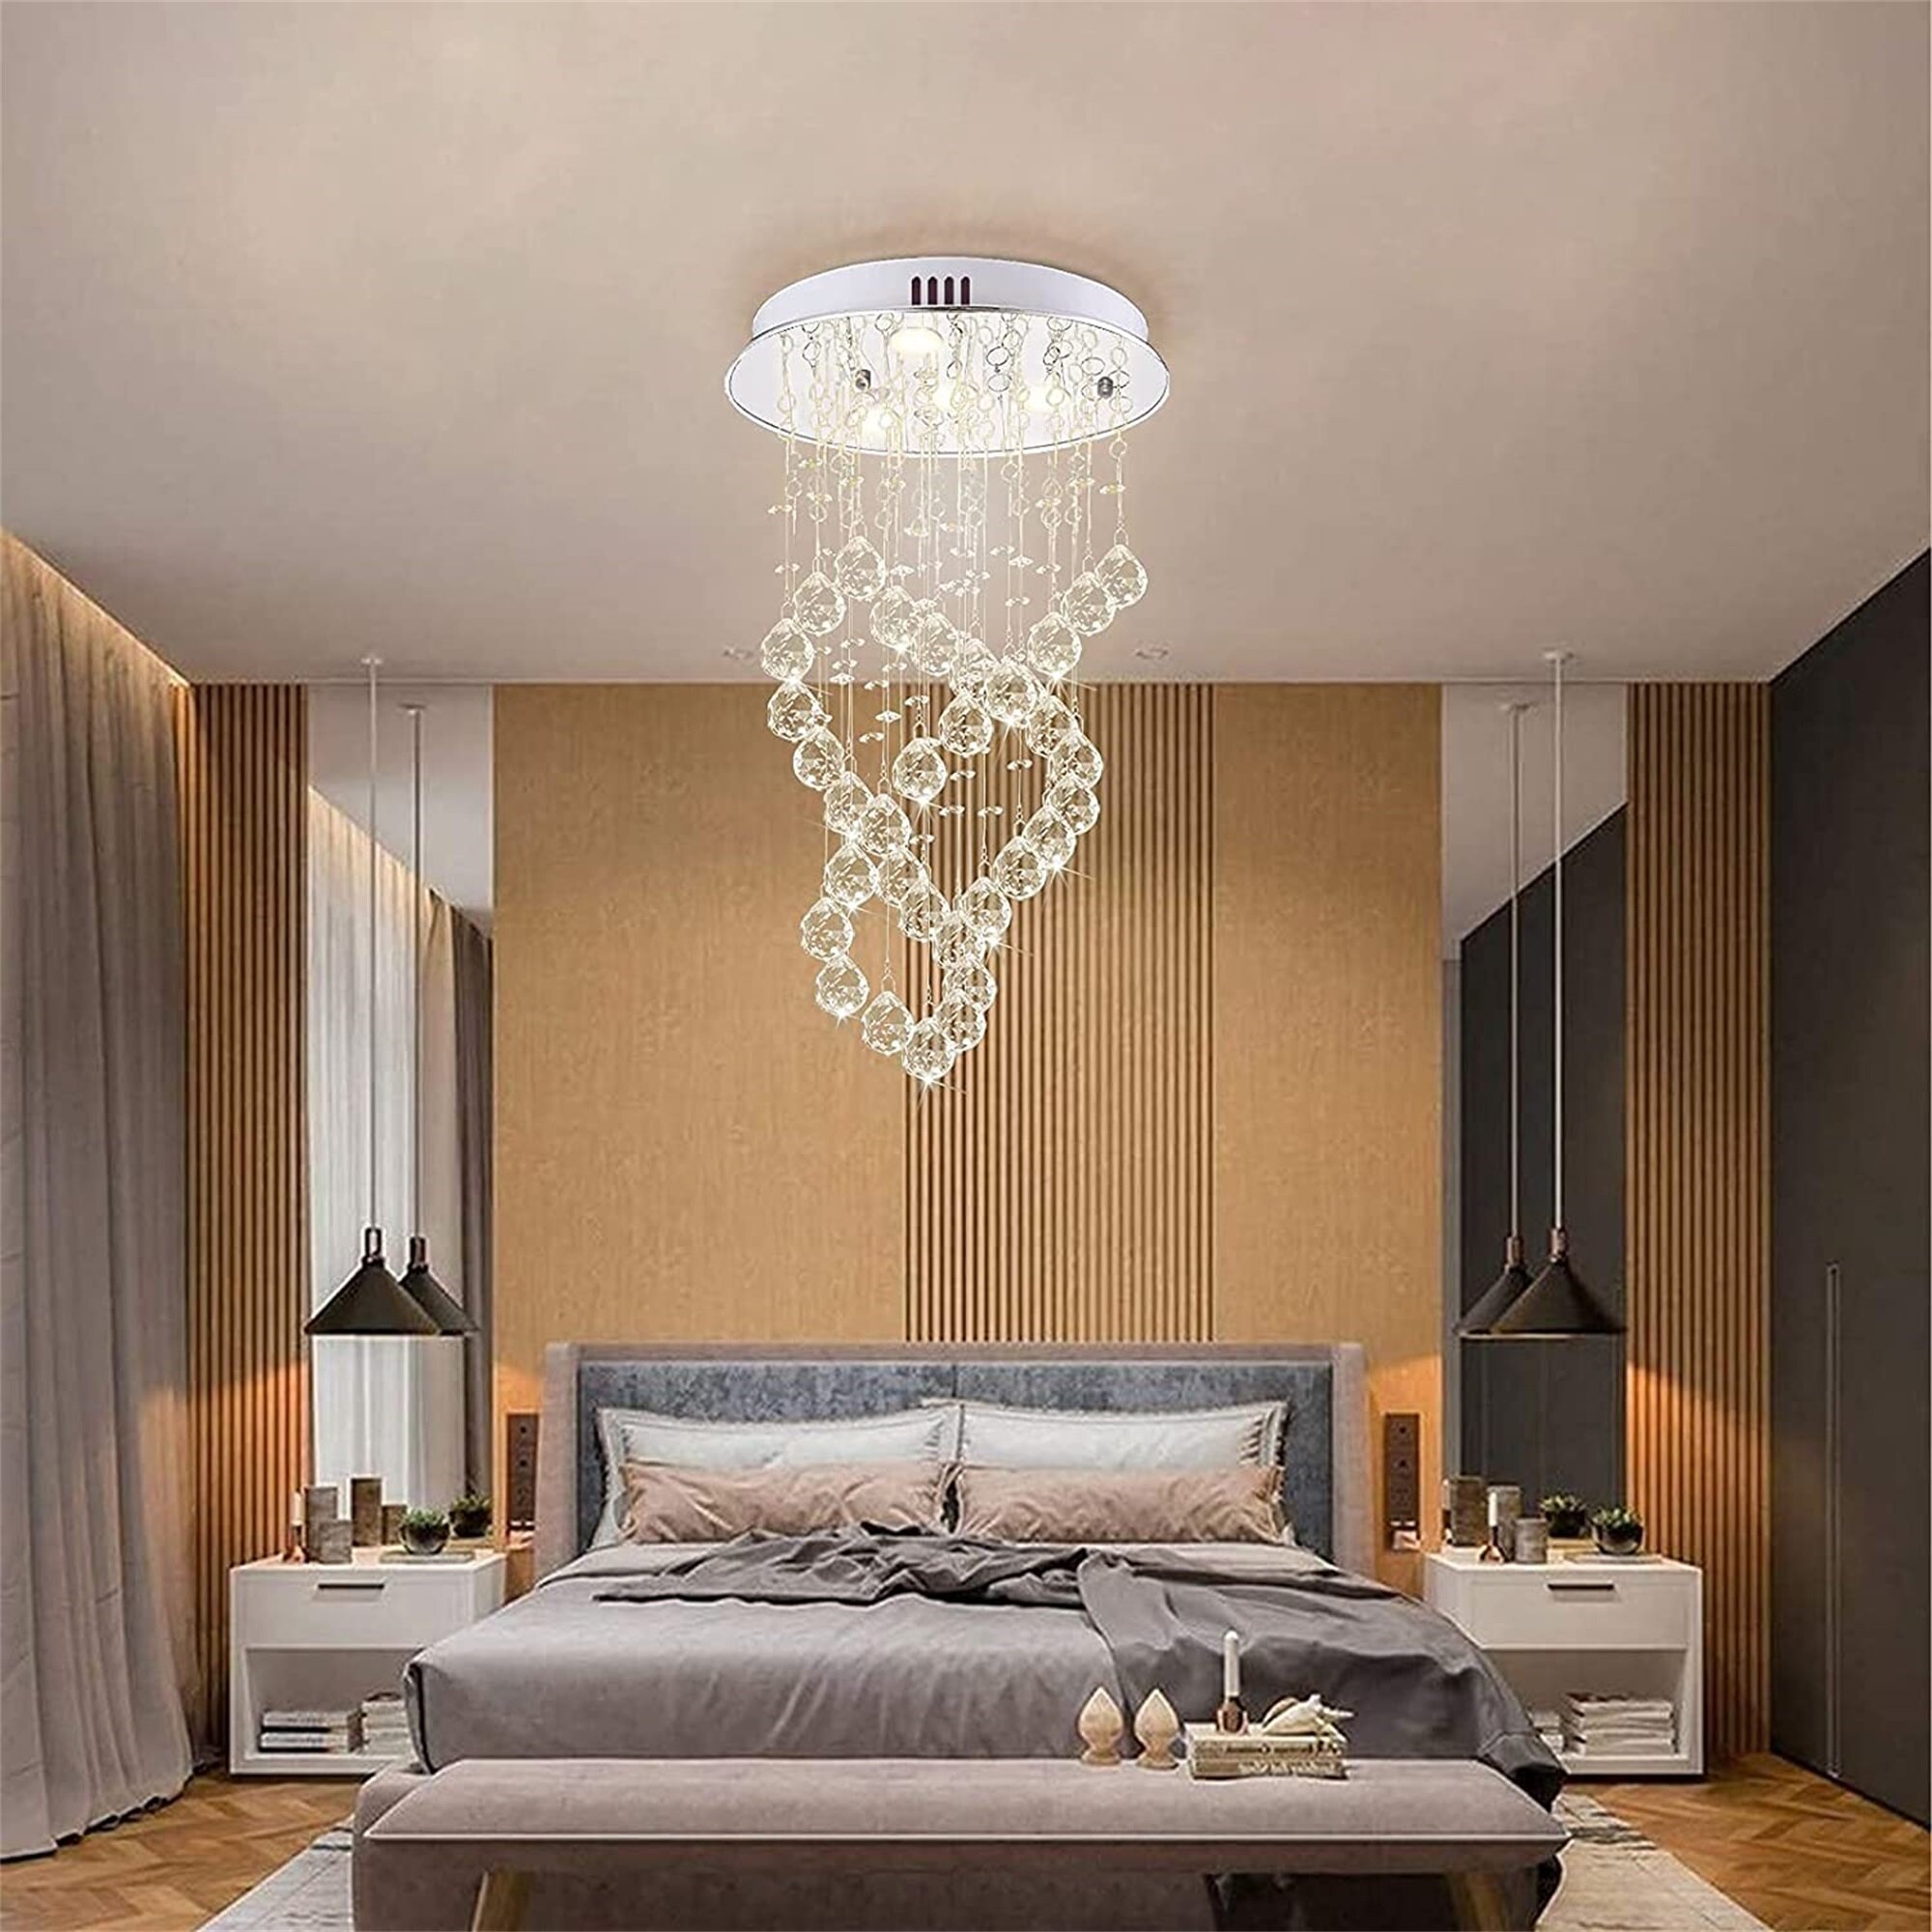 3 Tiers LED living room ceiling lamp Acrylic bedroom dining room pendant light A 